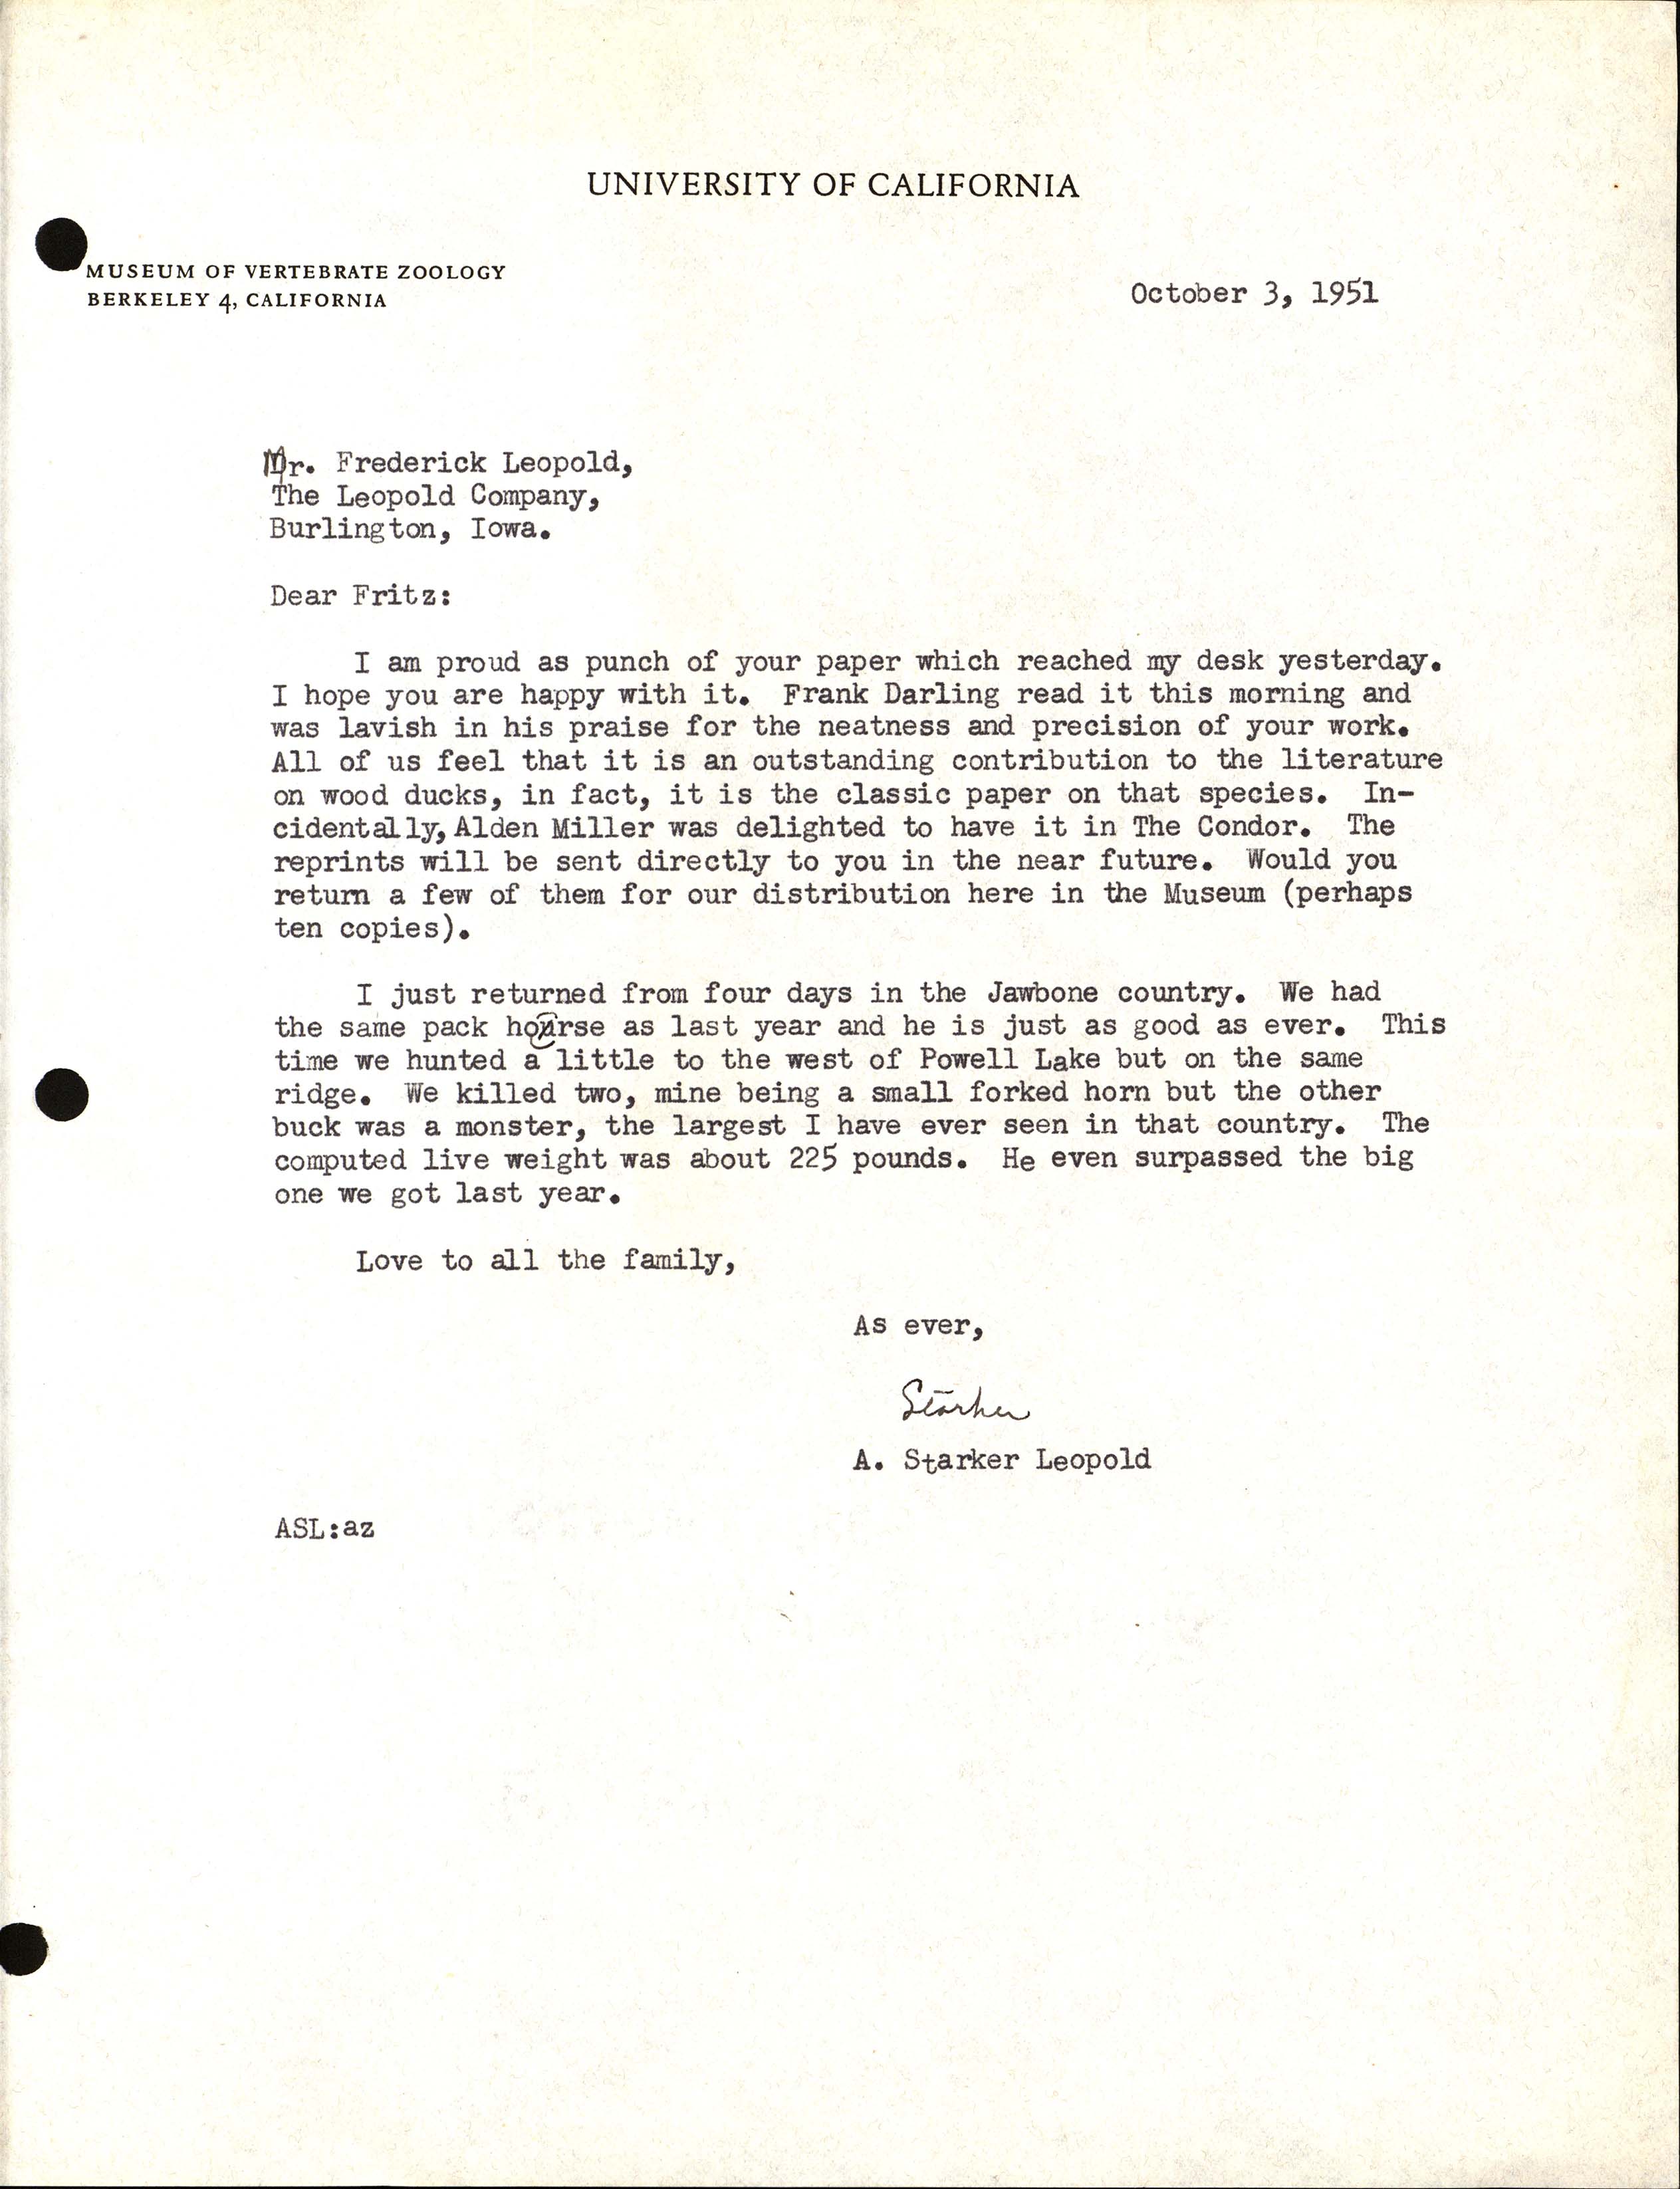 A. Starker Leopold letter to Frederic Leopold regarding a paper on Wood Ducks and a hunting trip, October 3, 1951